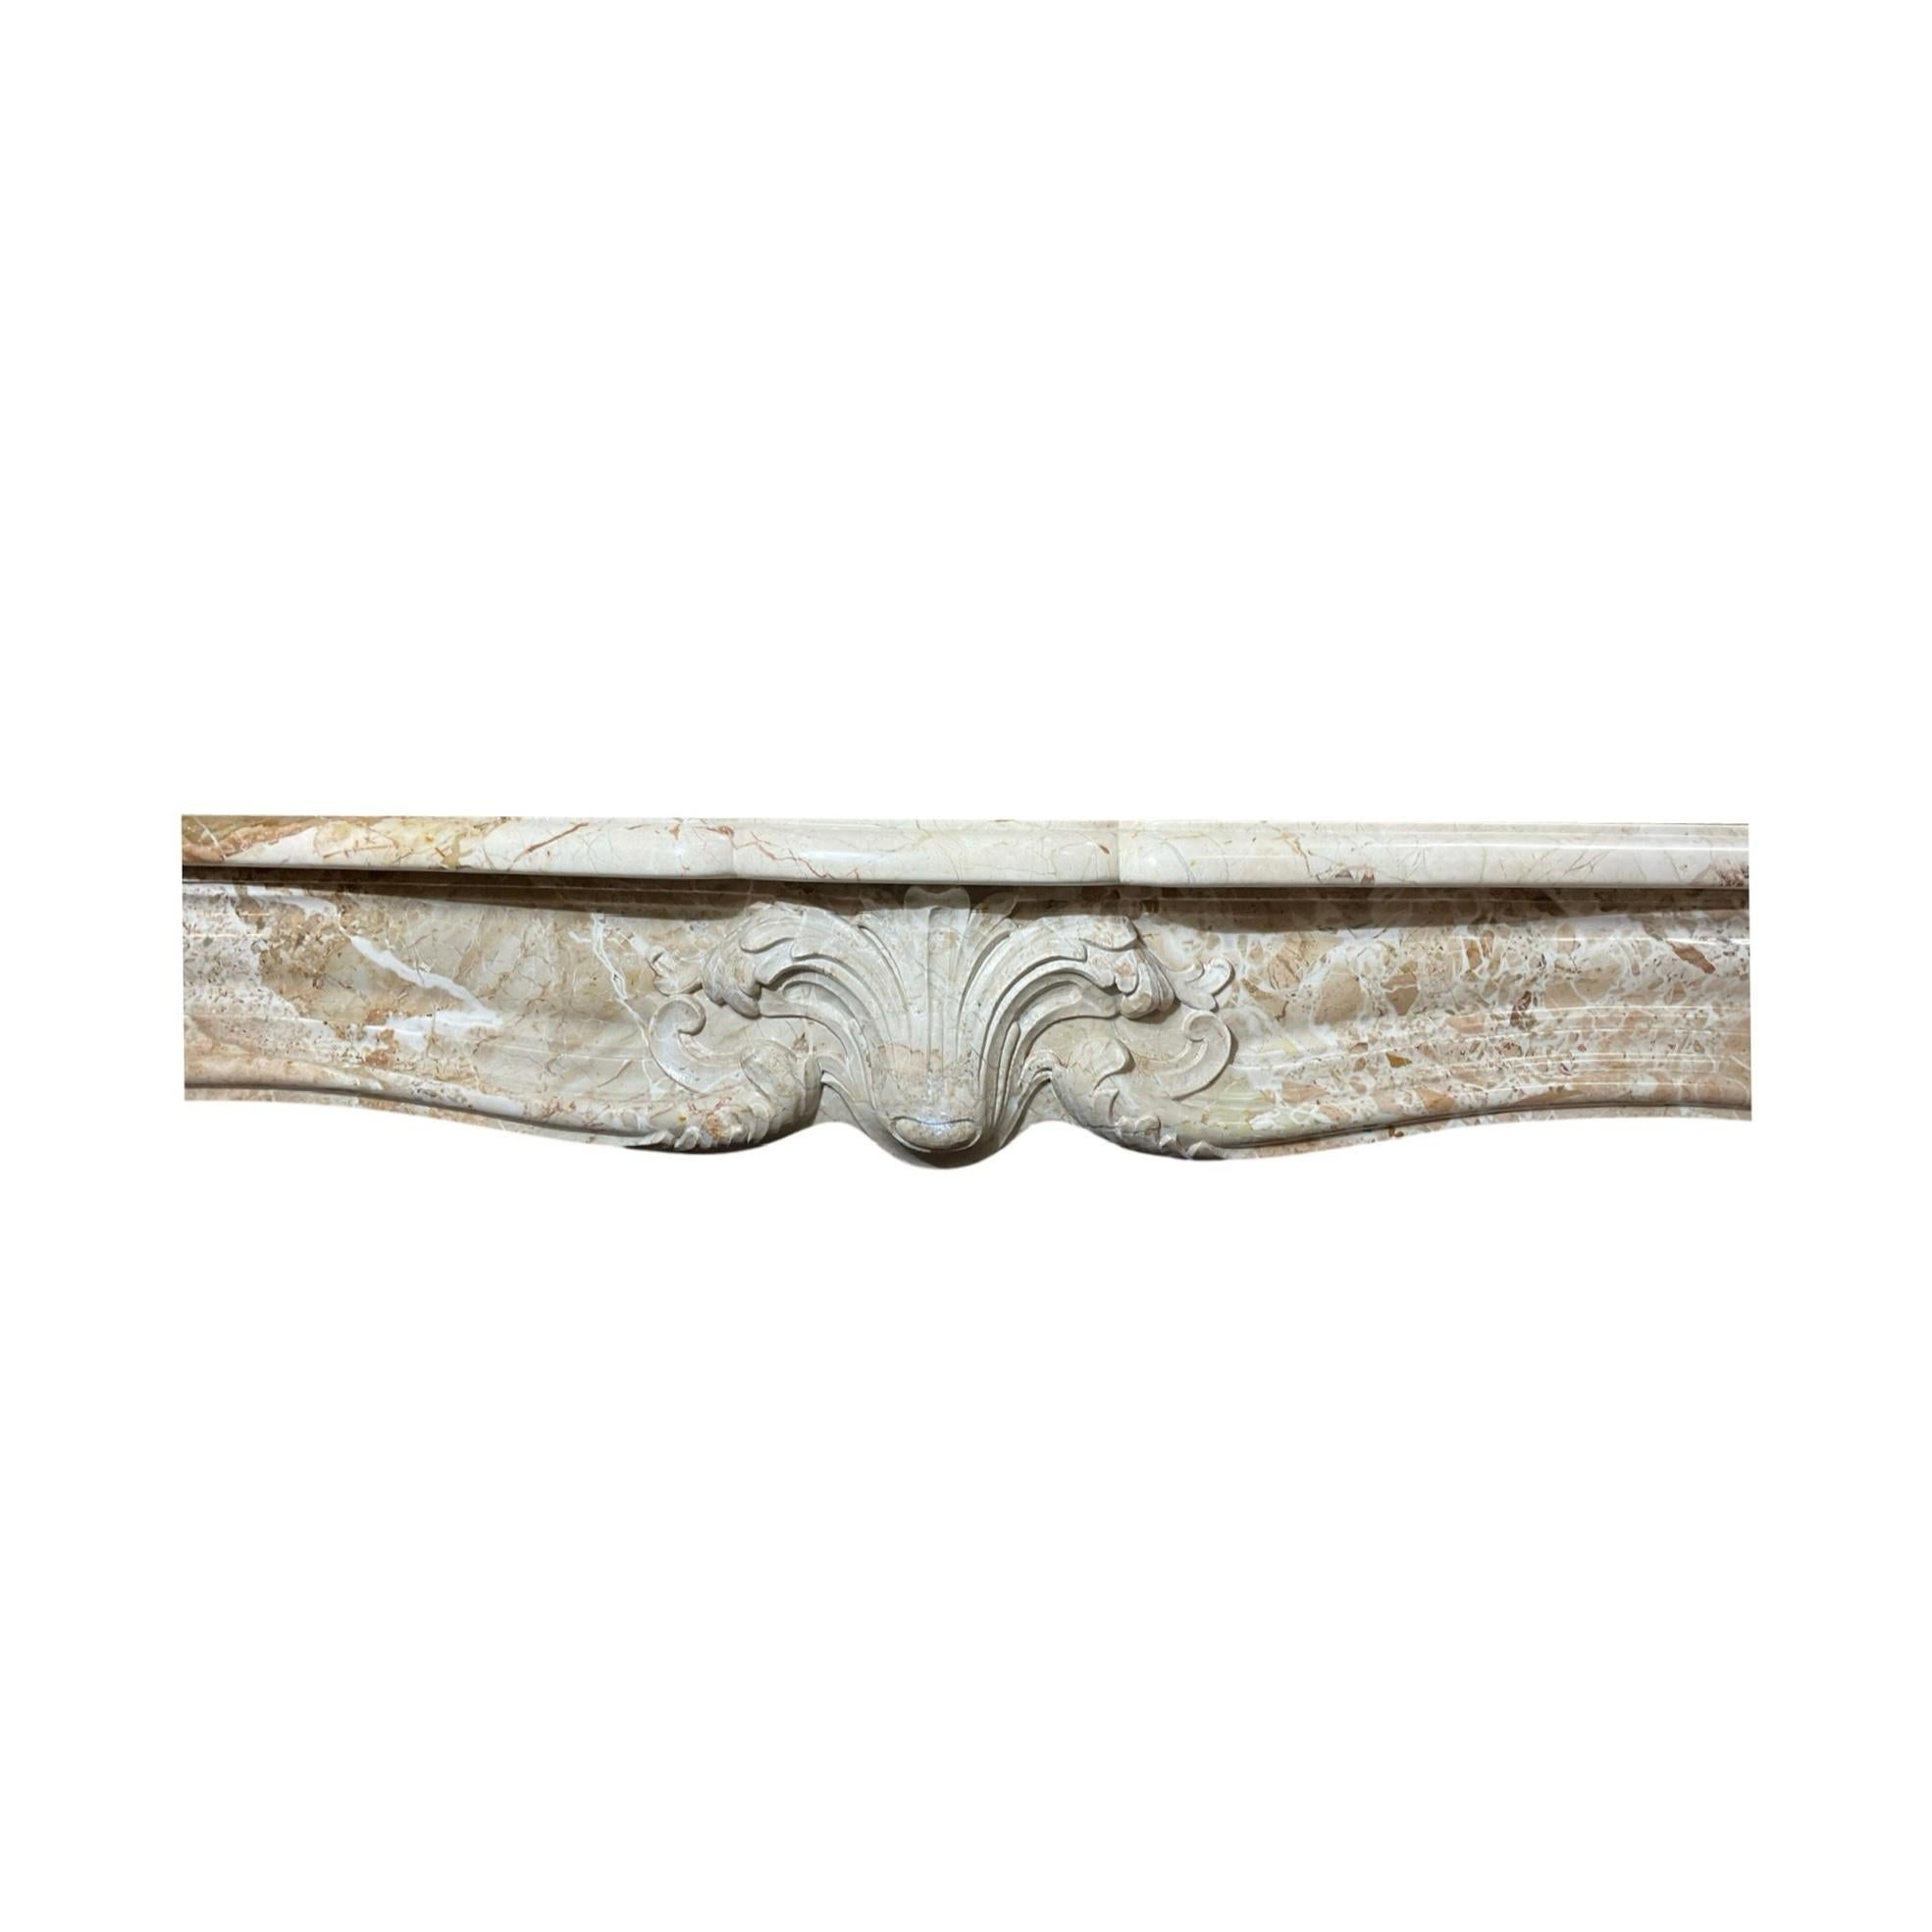 This beautiful French Grand Mix Napoleon Marble Mantel is an exquisite piece from 1880. It is crafted from grand mix Napoleon marble and adorned with Louis XVI style carvings, adding a touch of elegance to any room.